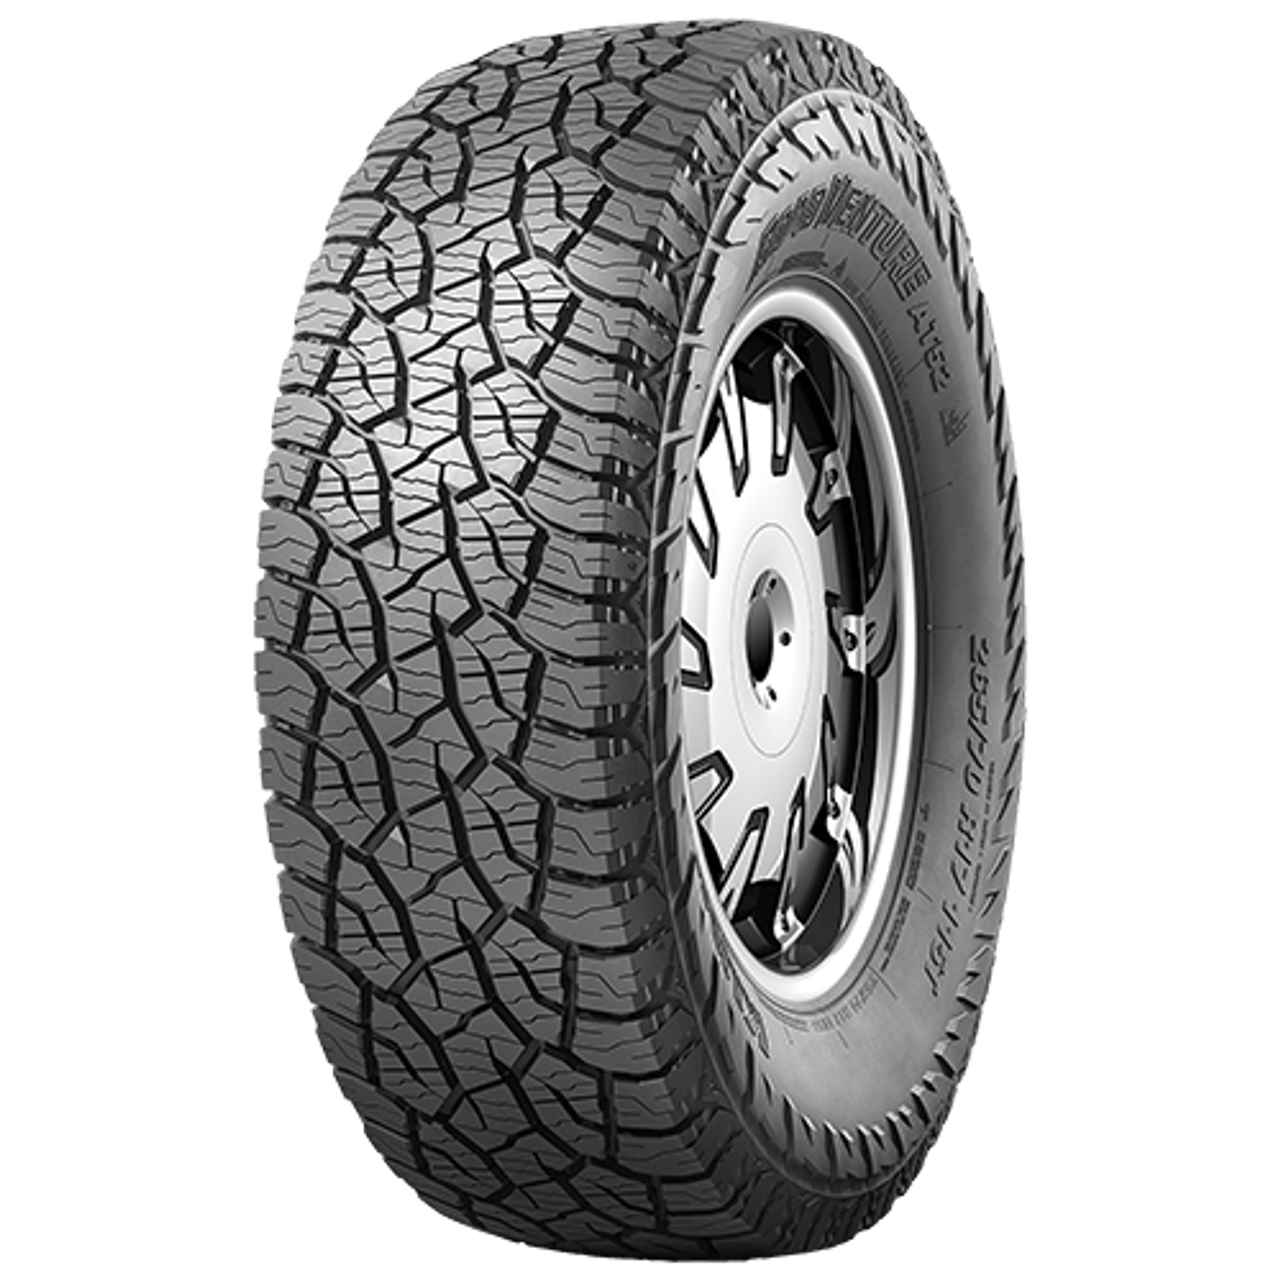 KUMHO ROAD VENTURE AT52 255/70R18 113T BSW